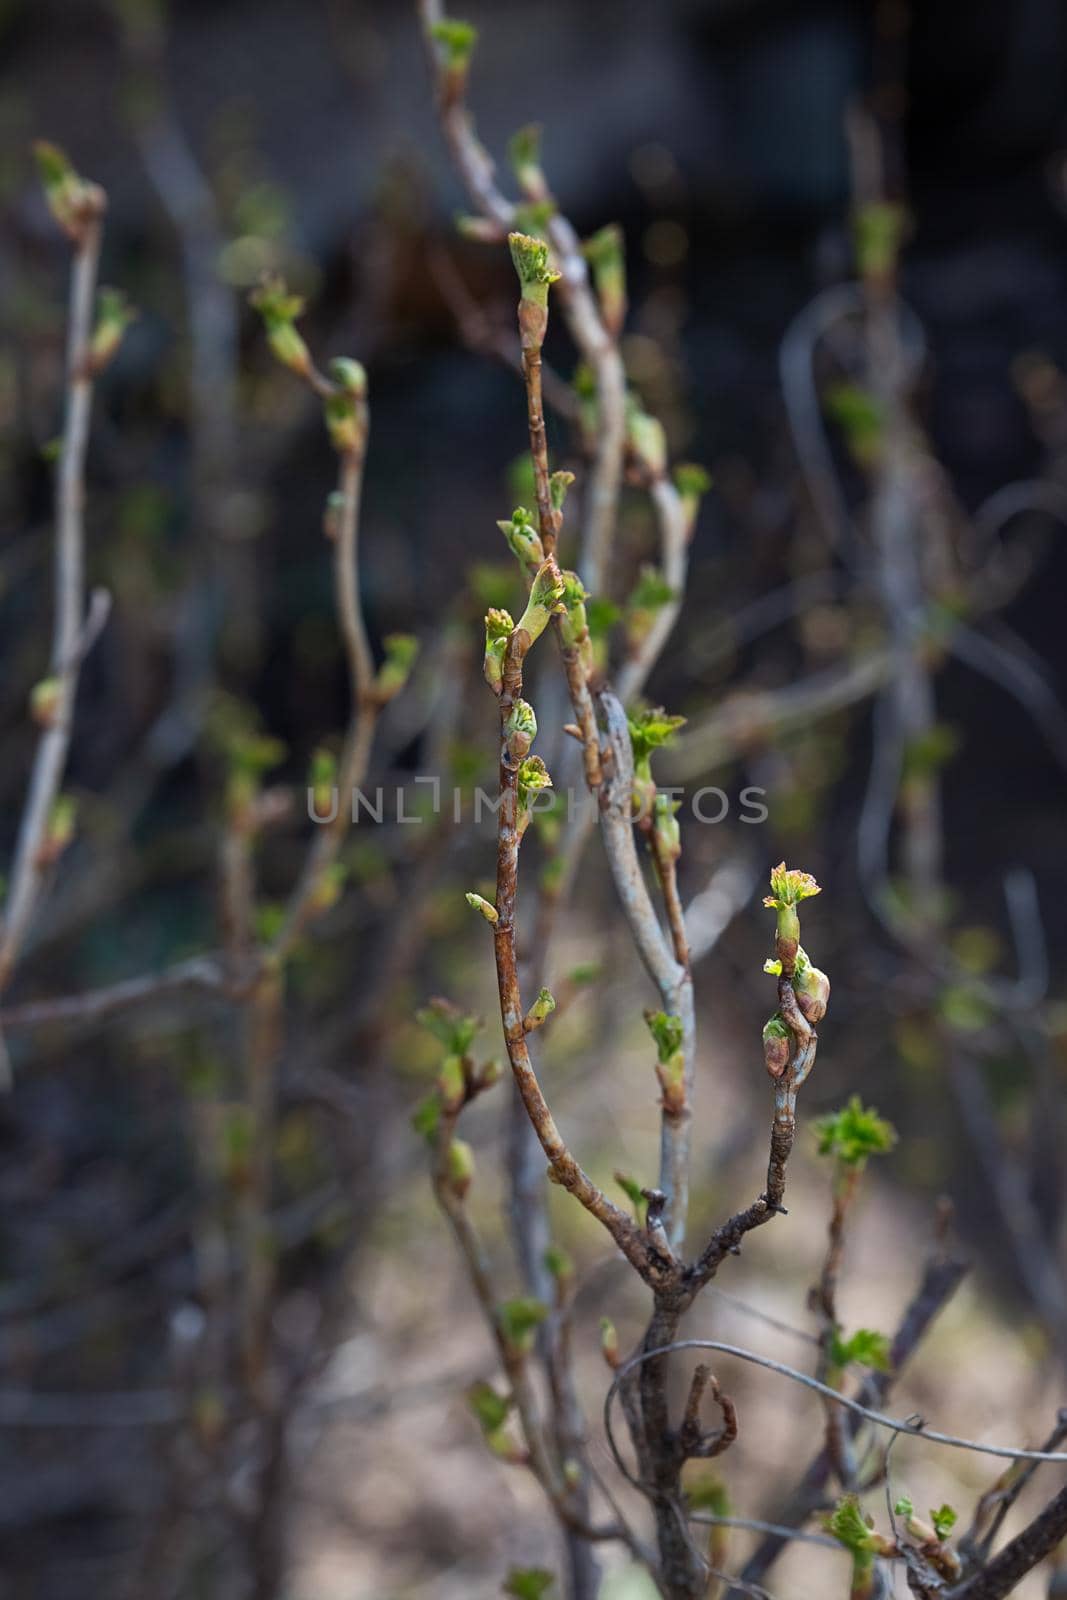 Close-up view of young leaves of black currant on blurred background with sun exposure vertical format. Photo of a reviving blossoming nature